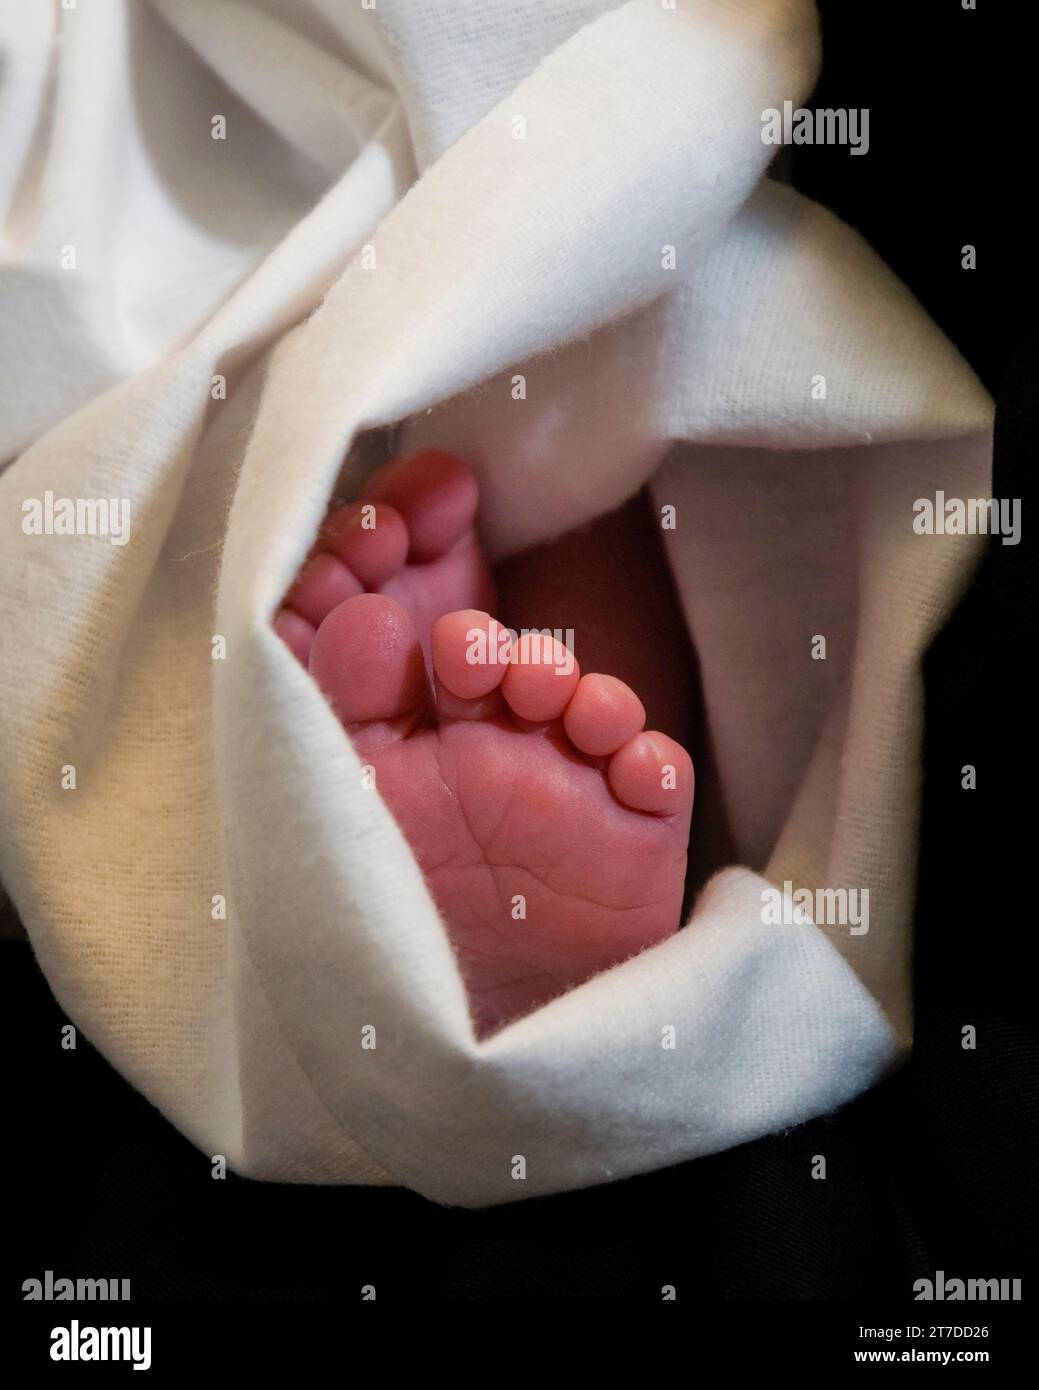 A pair of tiny, pink feet of a newborn baby wrapped in a soft, white blanket. Stock Photo